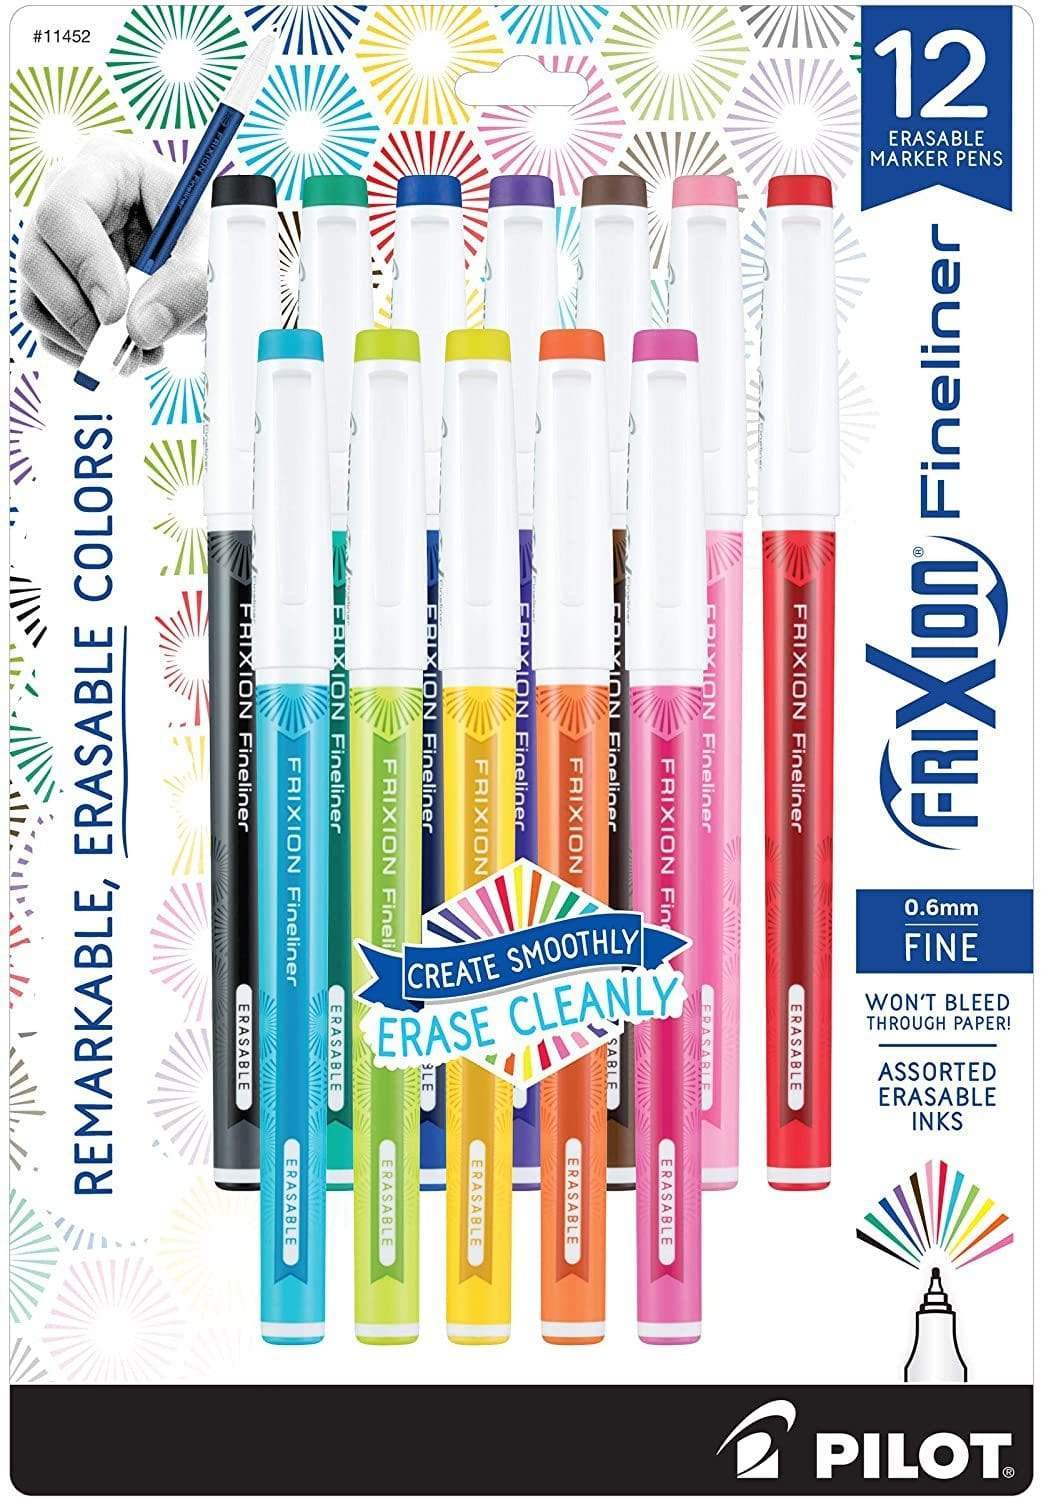 Autoquill Fineliner Pens – Airship Notebooks